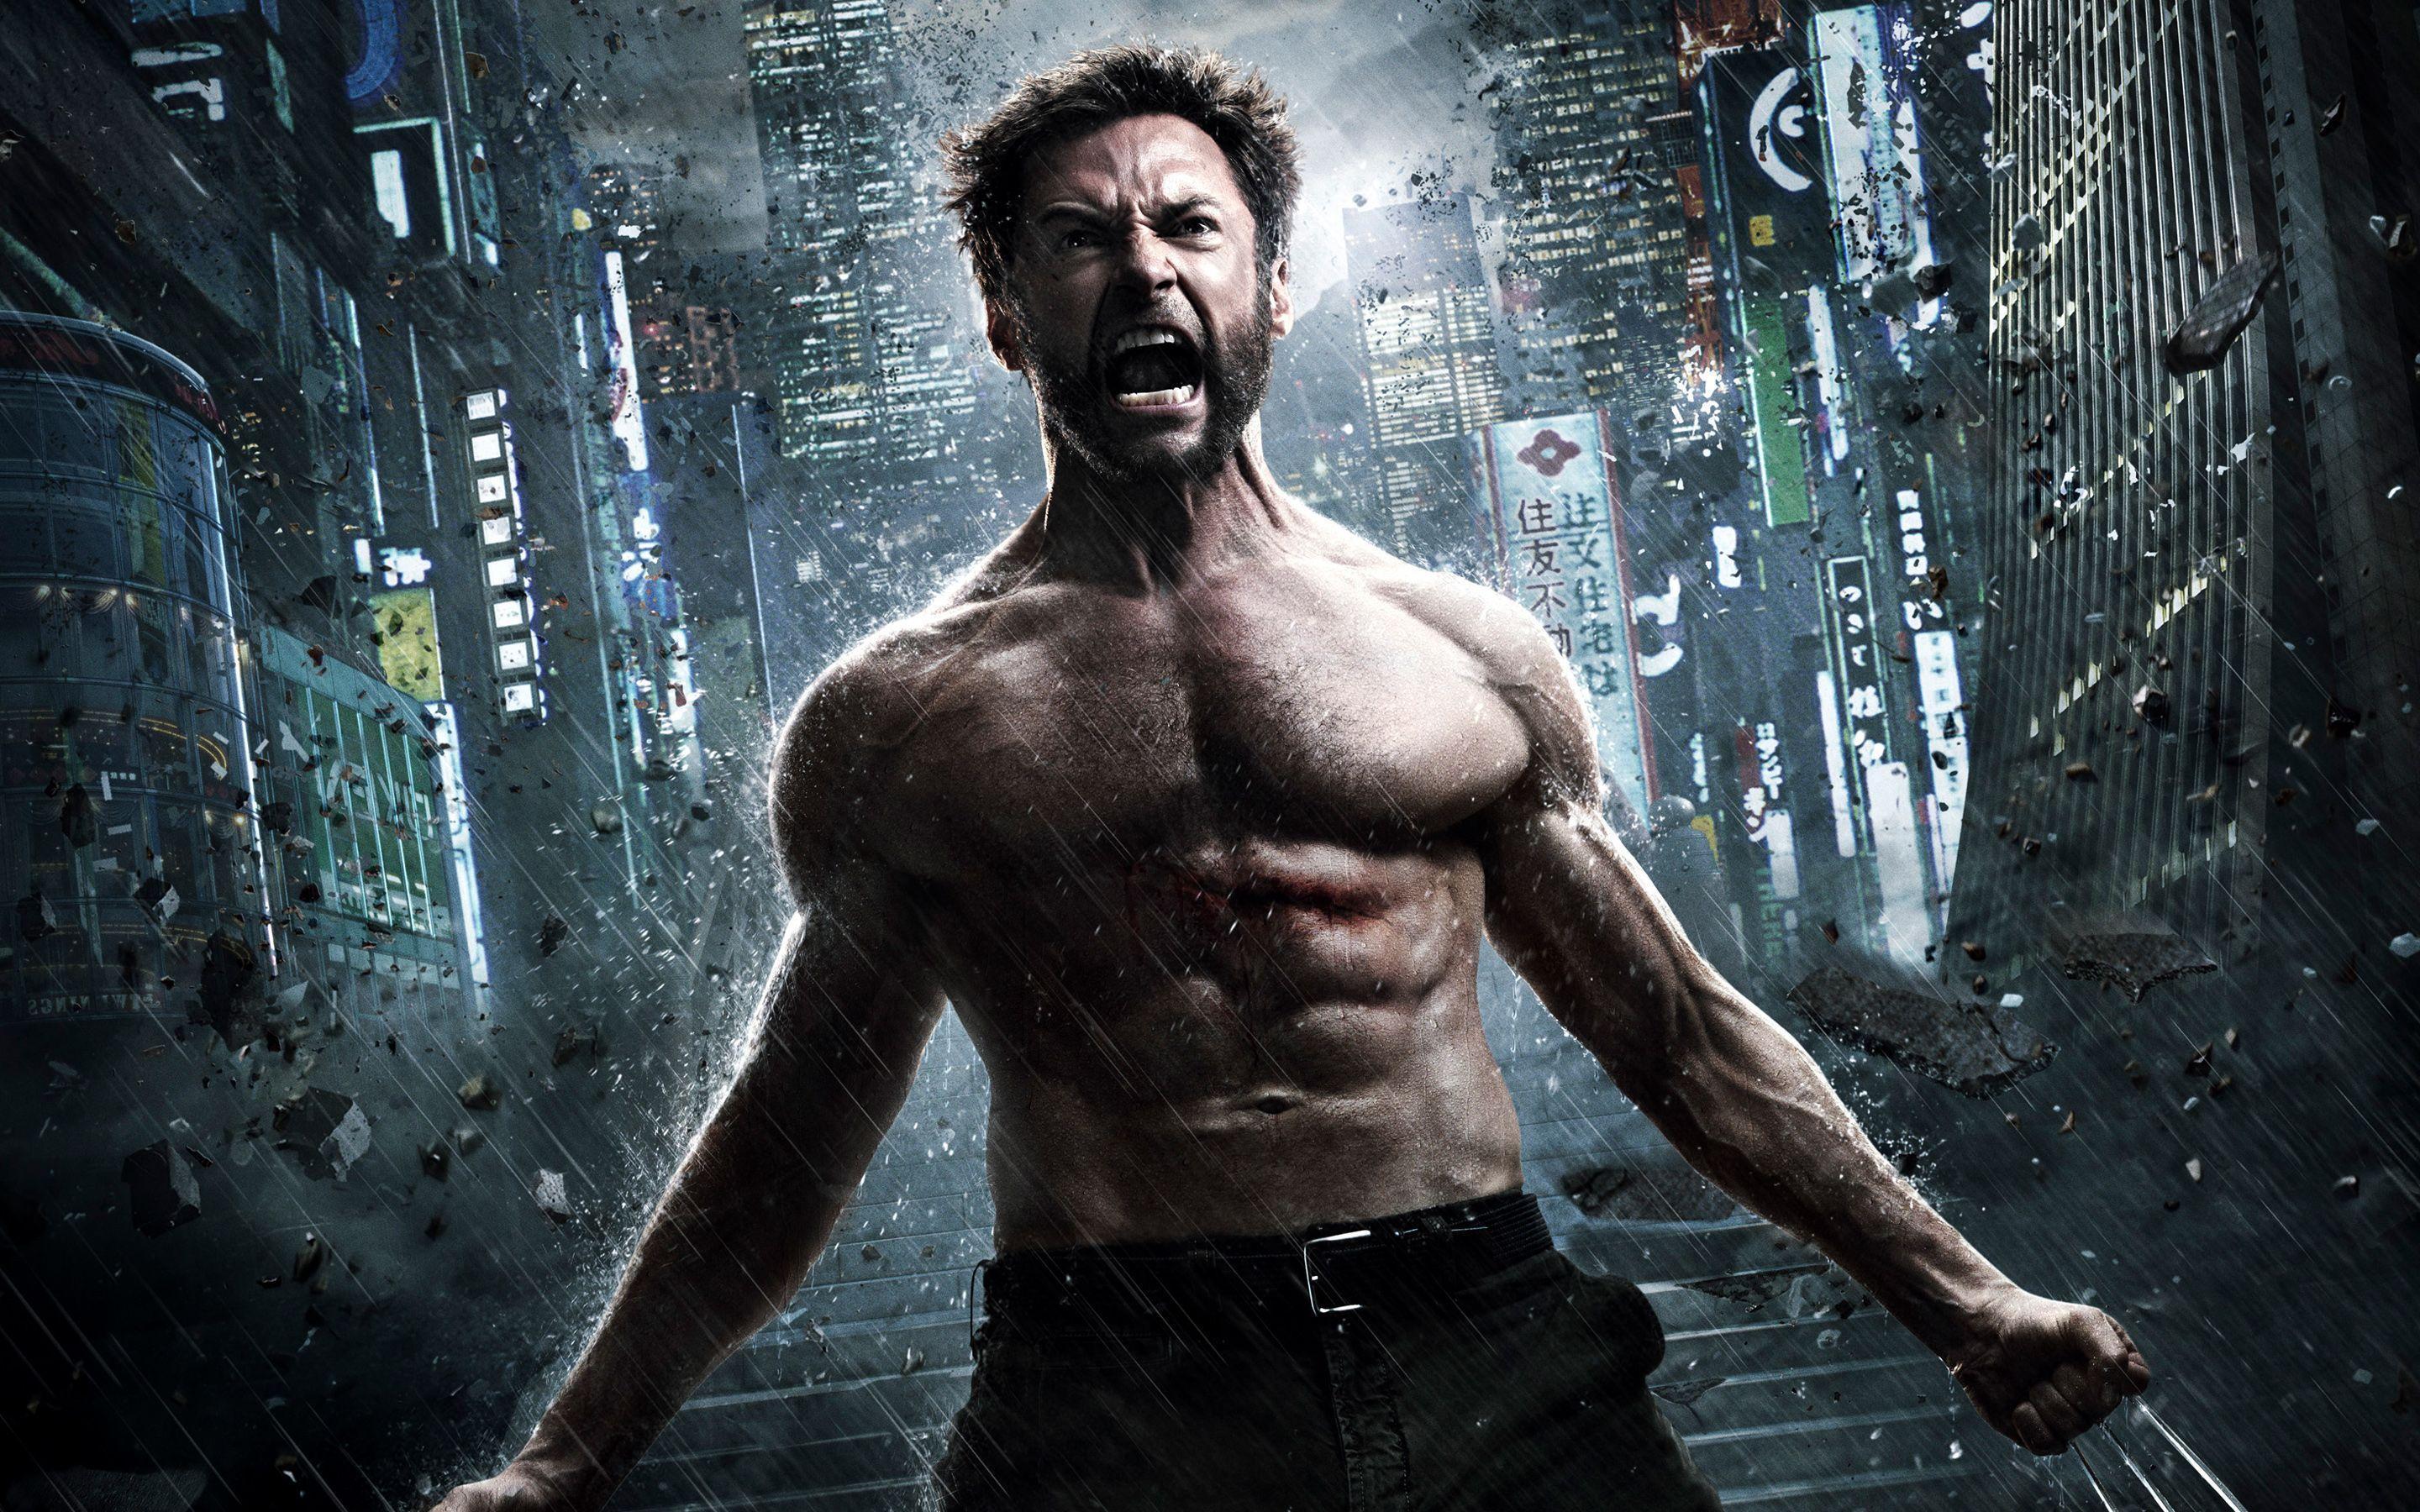 The Wolverine # 1920x1080. All For Desktop